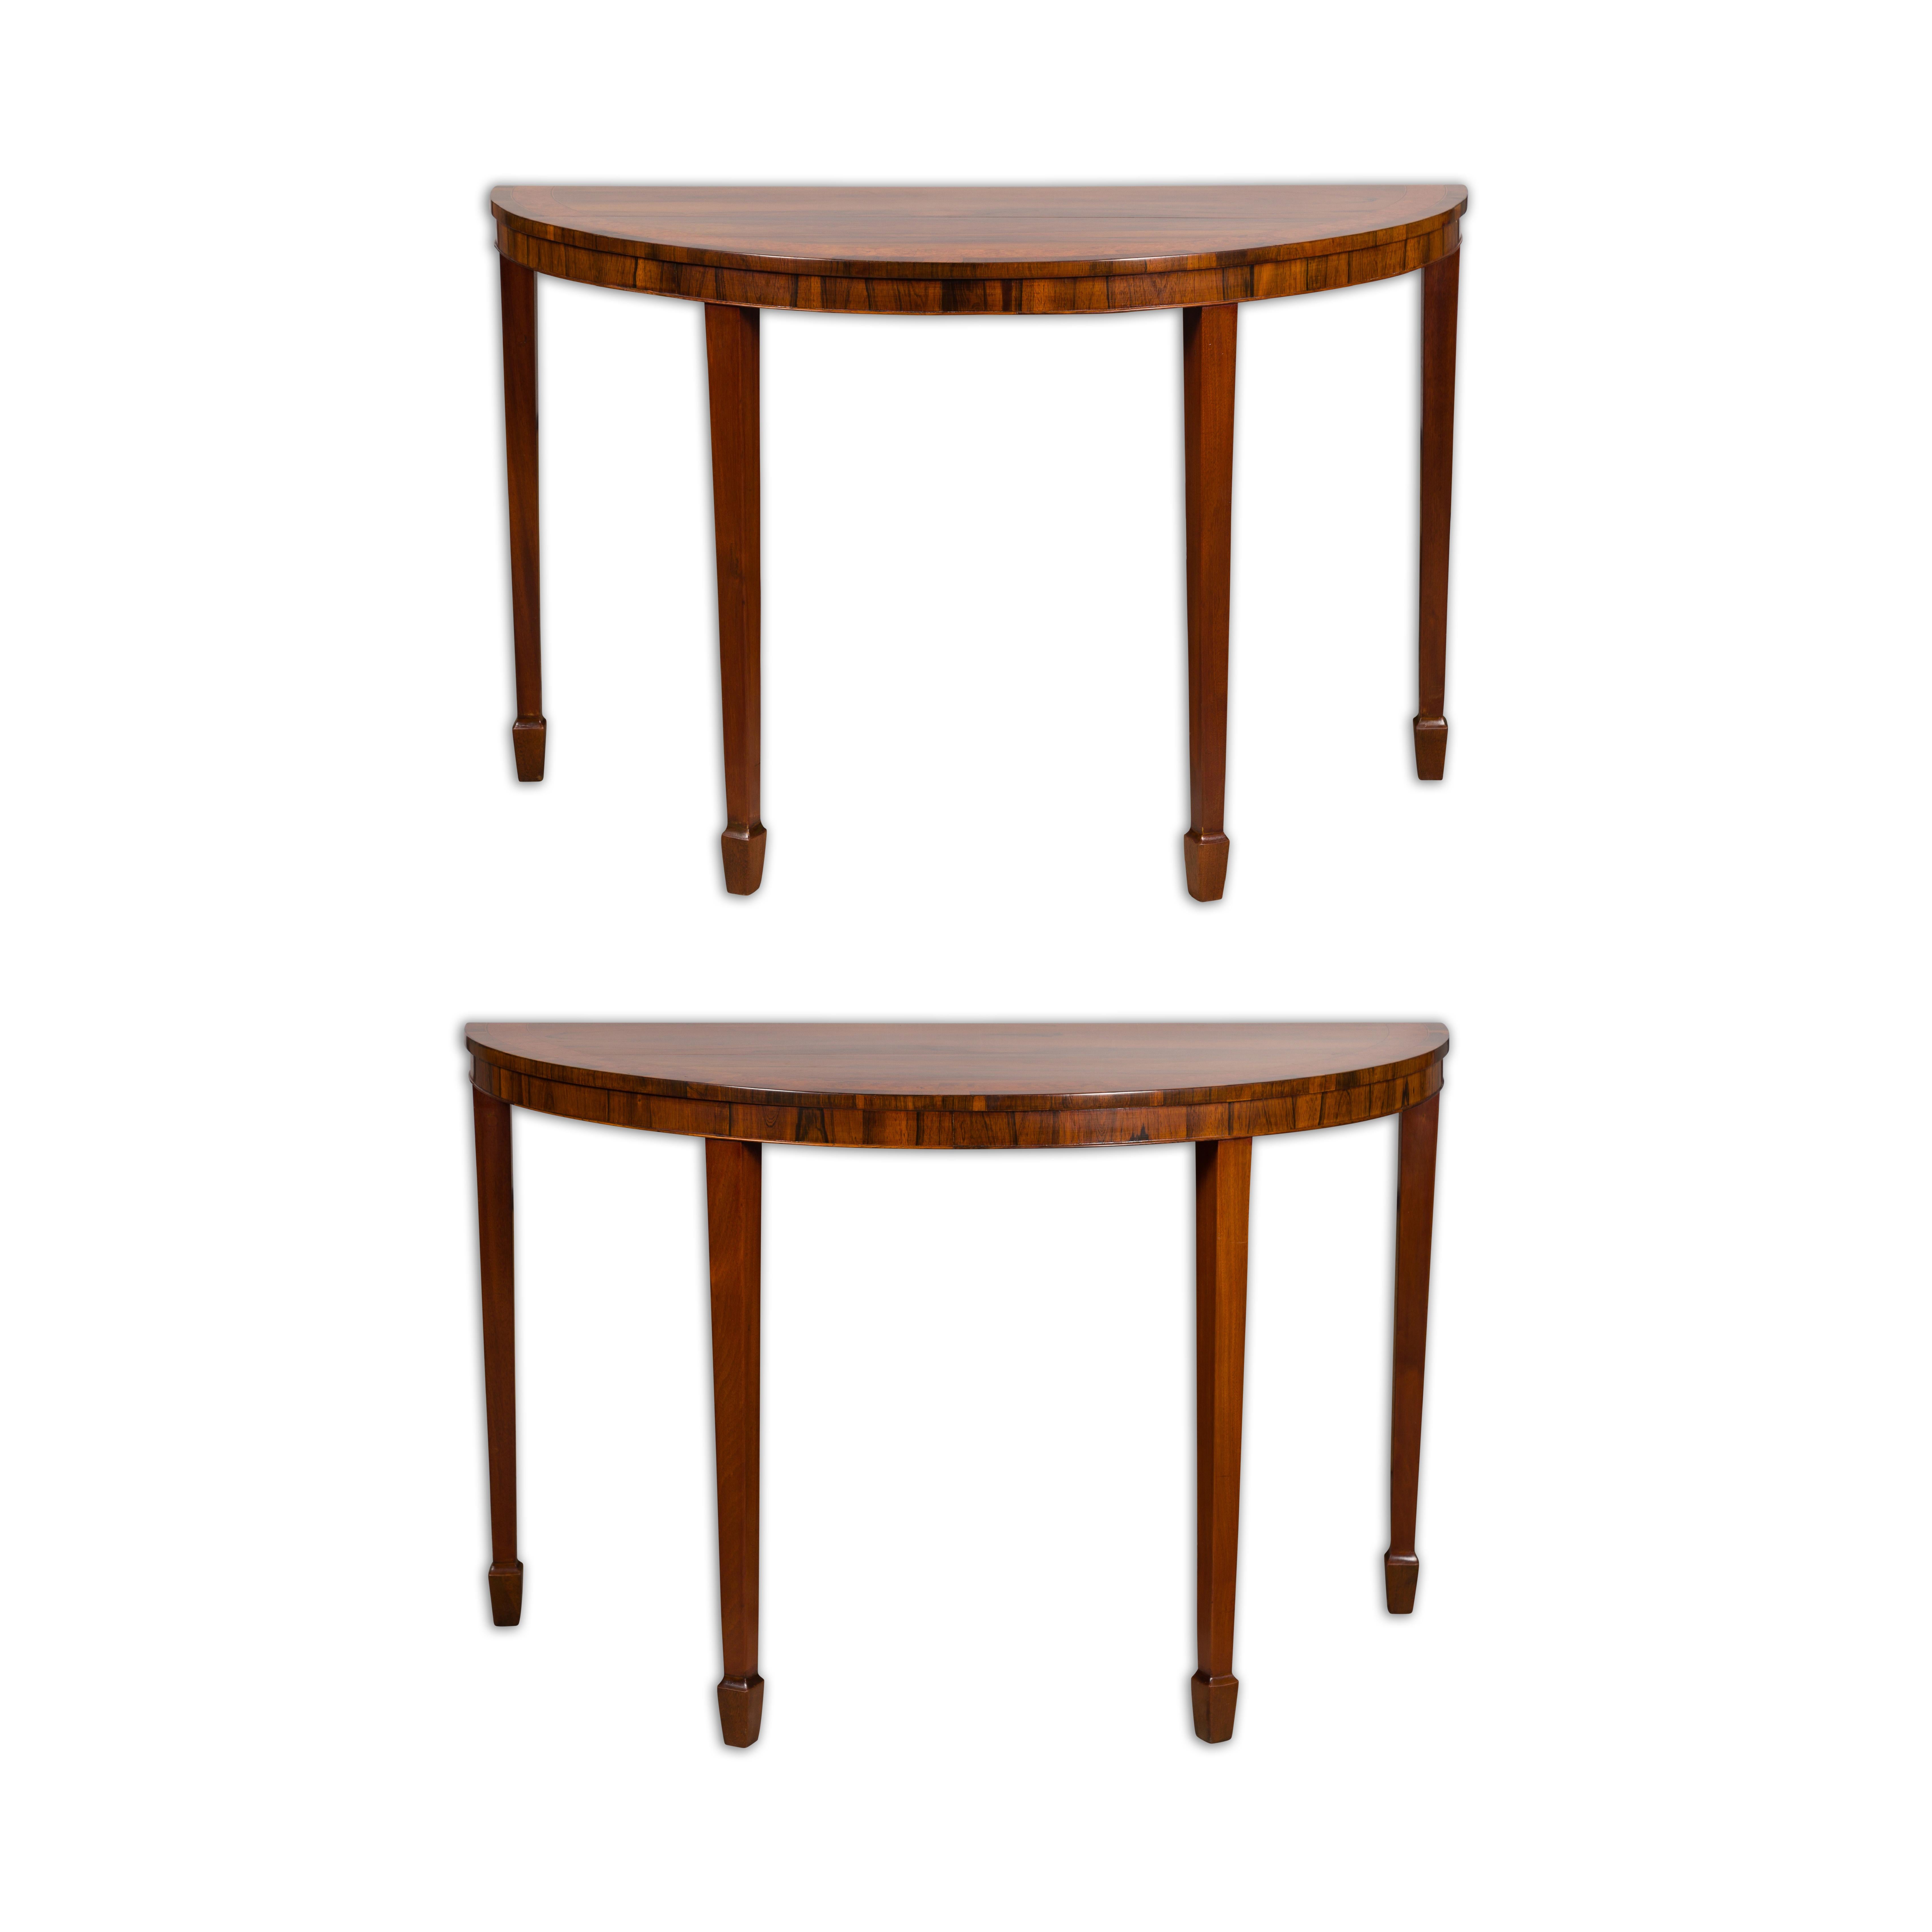 A pair of English mahogany demilune console tables from the 19th century with tapered legs, spade feet and thin banding. This pair of 19th-century English mahogany demilune console tables is a striking embodiment of classic elegance. Crafted with an